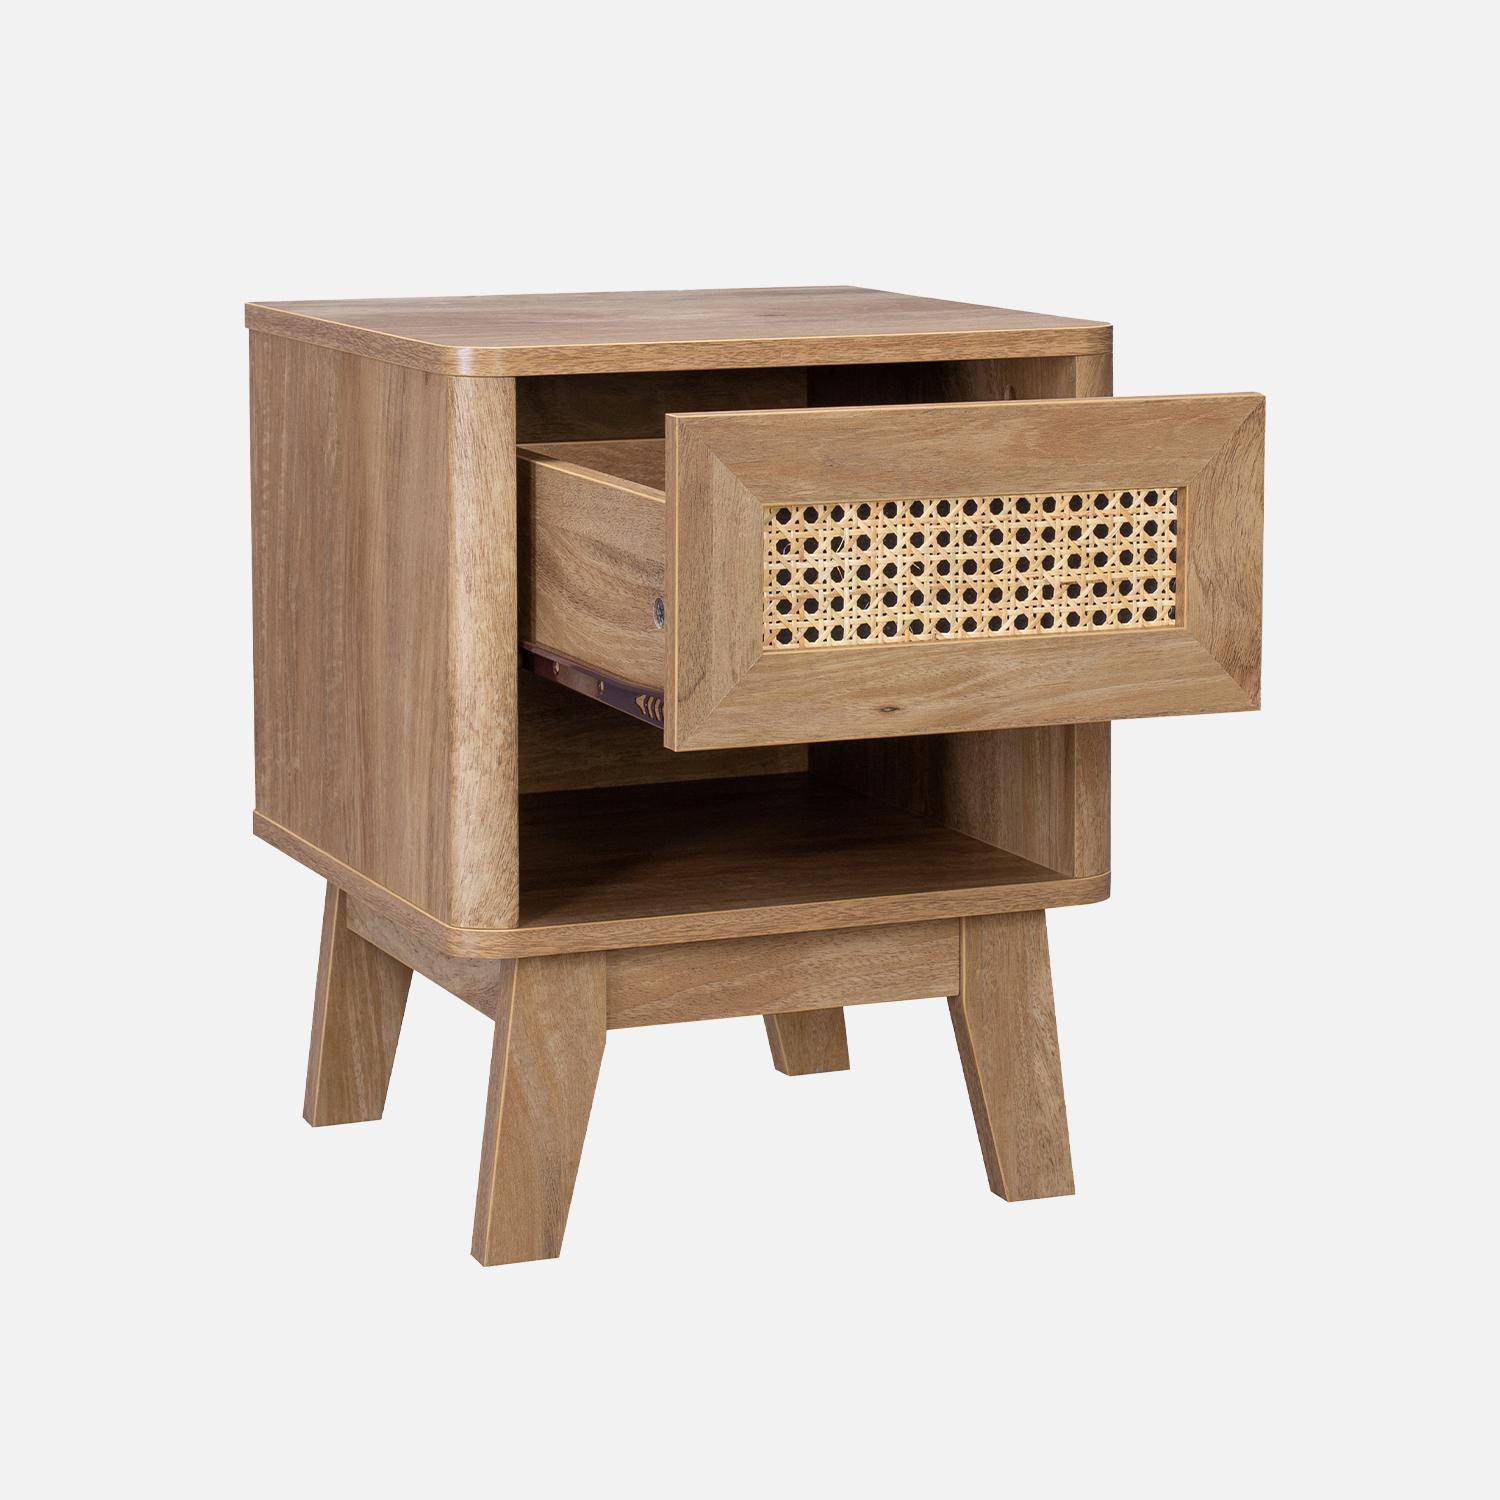 1-drawer bedside table with 1 niche, wood and cane effect, eucalyptus legs Photo3